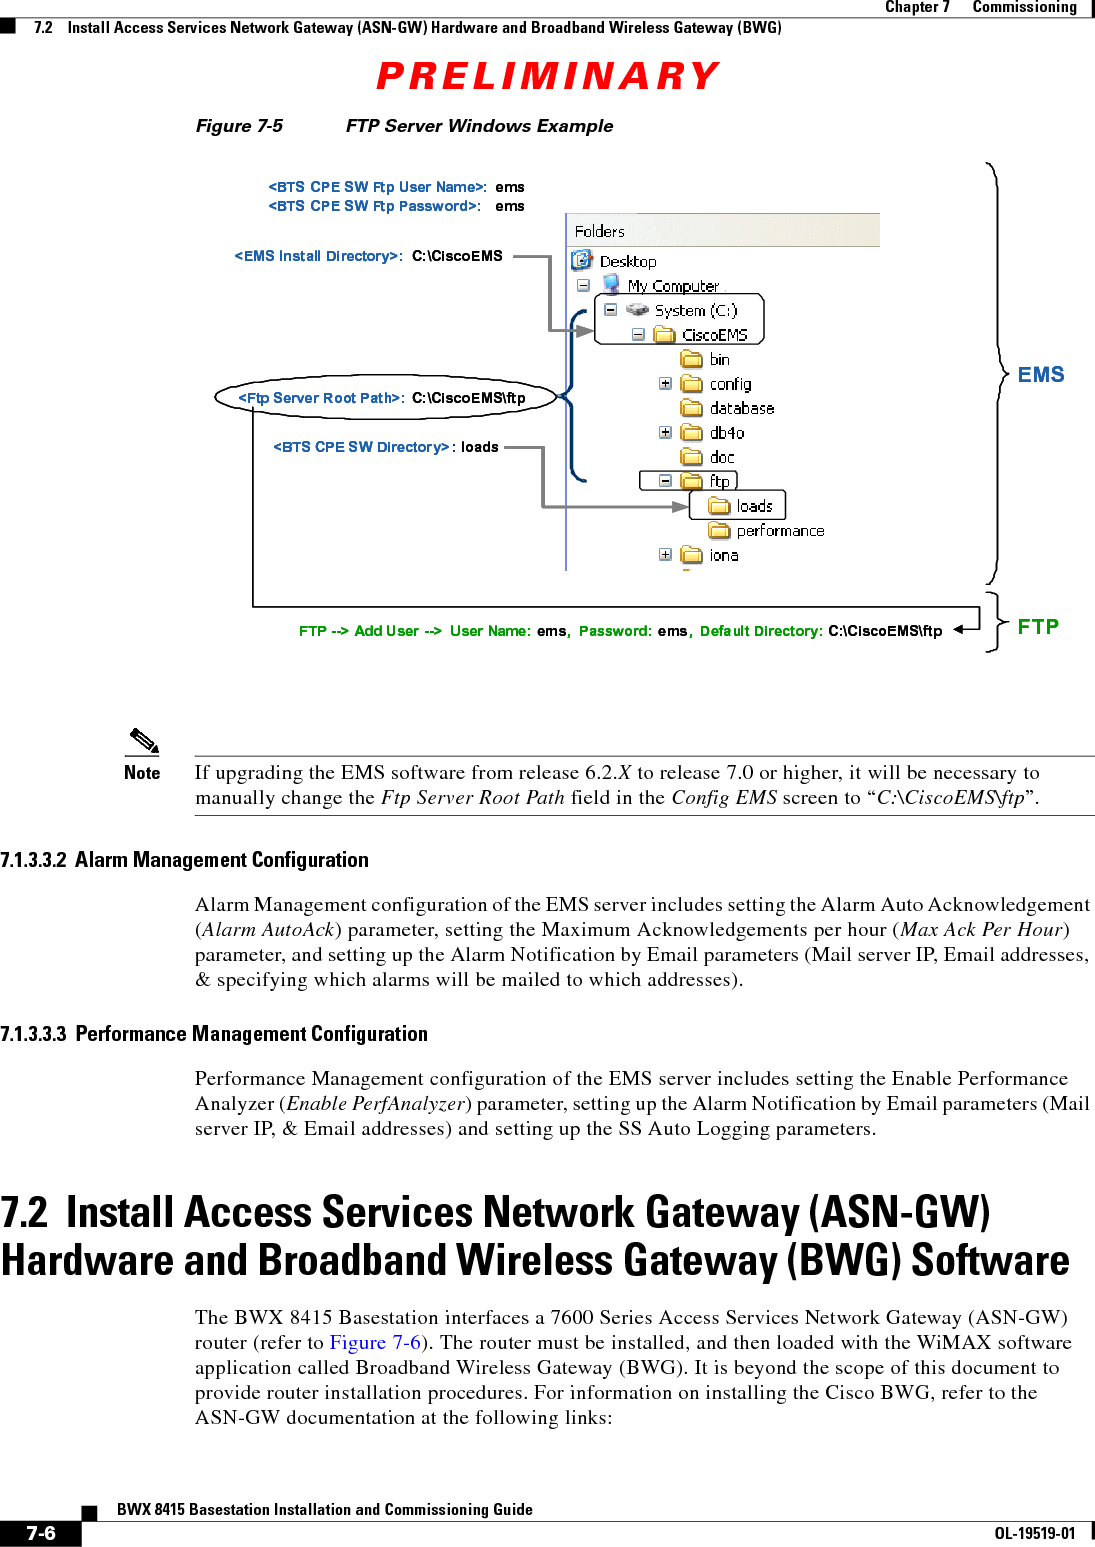 PRELIMINARY7-6BWX 8415 Basestation Installation and Commissioning GuideOL-19519-01Chapter 7      Commissioning7.2    Install Access Services Network Gateway (ASN-GW) Hardware and Broadband Wireless Gateway (BWG) Figure 7-5 FTP Server Windows Example Note If upgrading the EMS software from release 6.2.X to release 7.0 or higher, it will be necessary to manually change the Ftp Server Root Path field in the Config EMS screen to “C:\CiscoEMS\ftp”.7.1.3.3.2  Alarm Management ConfigurationAlarm Management configuration of the EMS server includes setting the Alarm Auto Acknowledgement (Alarm AutoAck) parameter, setting the Maximum Acknowledgements per hour (Max Ack Per Hour) parameter, and setting up the Alarm Notification by Email parameters (Mail server IP, Email addresses, &amp; specifying which alarms will be mailed to which addresses).7.1.3.3.3  Performance Management ConfigurationPerformance Management configuration of the EMS server includes setting the Enable Performance Analyzer (Enable PerfAnalyzer) parameter, setting up the Alarm Notification by Email parameters (Mail server IP, &amp; Email addresses) and setting up the SS Auto Logging parameters.7.2  Install Access Services Network Gateway (ASN-GW) Hardware and Broadband Wireless Gateway (BWG) SoftwareThe BWX 8415 Basestation interfaces a 7600 Series Access Services Network Gateway (ASN-GW) router (refer to Figure 7-6). The router must be installed, and then loaded with the WiMAX software application called Broadband Wireless Gateway (BWG). It is beyond the scope of this document to provide router installation procedures. For information on installing the Cisco BWG, refer to the ASN-GW documentation at the following links:&lt;EMS Install Directory&gt;: C:\CiscoEMS&lt;Ftp Server Root Path&gt;:  C:\CiscoEMS\ft p&lt;BTS CPE SW Directory&gt;: loads&lt;BTS CPE SW Ftp User Name&gt;: ems&lt;BTS CPE SW Ftp Password&gt;: emsFTP --&gt; Add User --&gt;  User Name: ems,  Password: ems,  Default Directory: C:\CiscoEMS\ftp FTPEMS&lt;EMS Install Directory&gt;: C:\CiscoEMS&lt;Ftp Server Root Path&gt;:  C:\CiscoEMS\ft p&lt;BTS CPE SW Directory&gt;: loads&lt;BTS CPE SW Ftp User Name&gt;: ems&lt;BTS CPE SW Ftp Password&gt;: emsFTP --&gt; Add User --&gt;  User Name: ems,  Password: ems,  Default Directory: C:\CiscoEMS\ftp FTPEMS